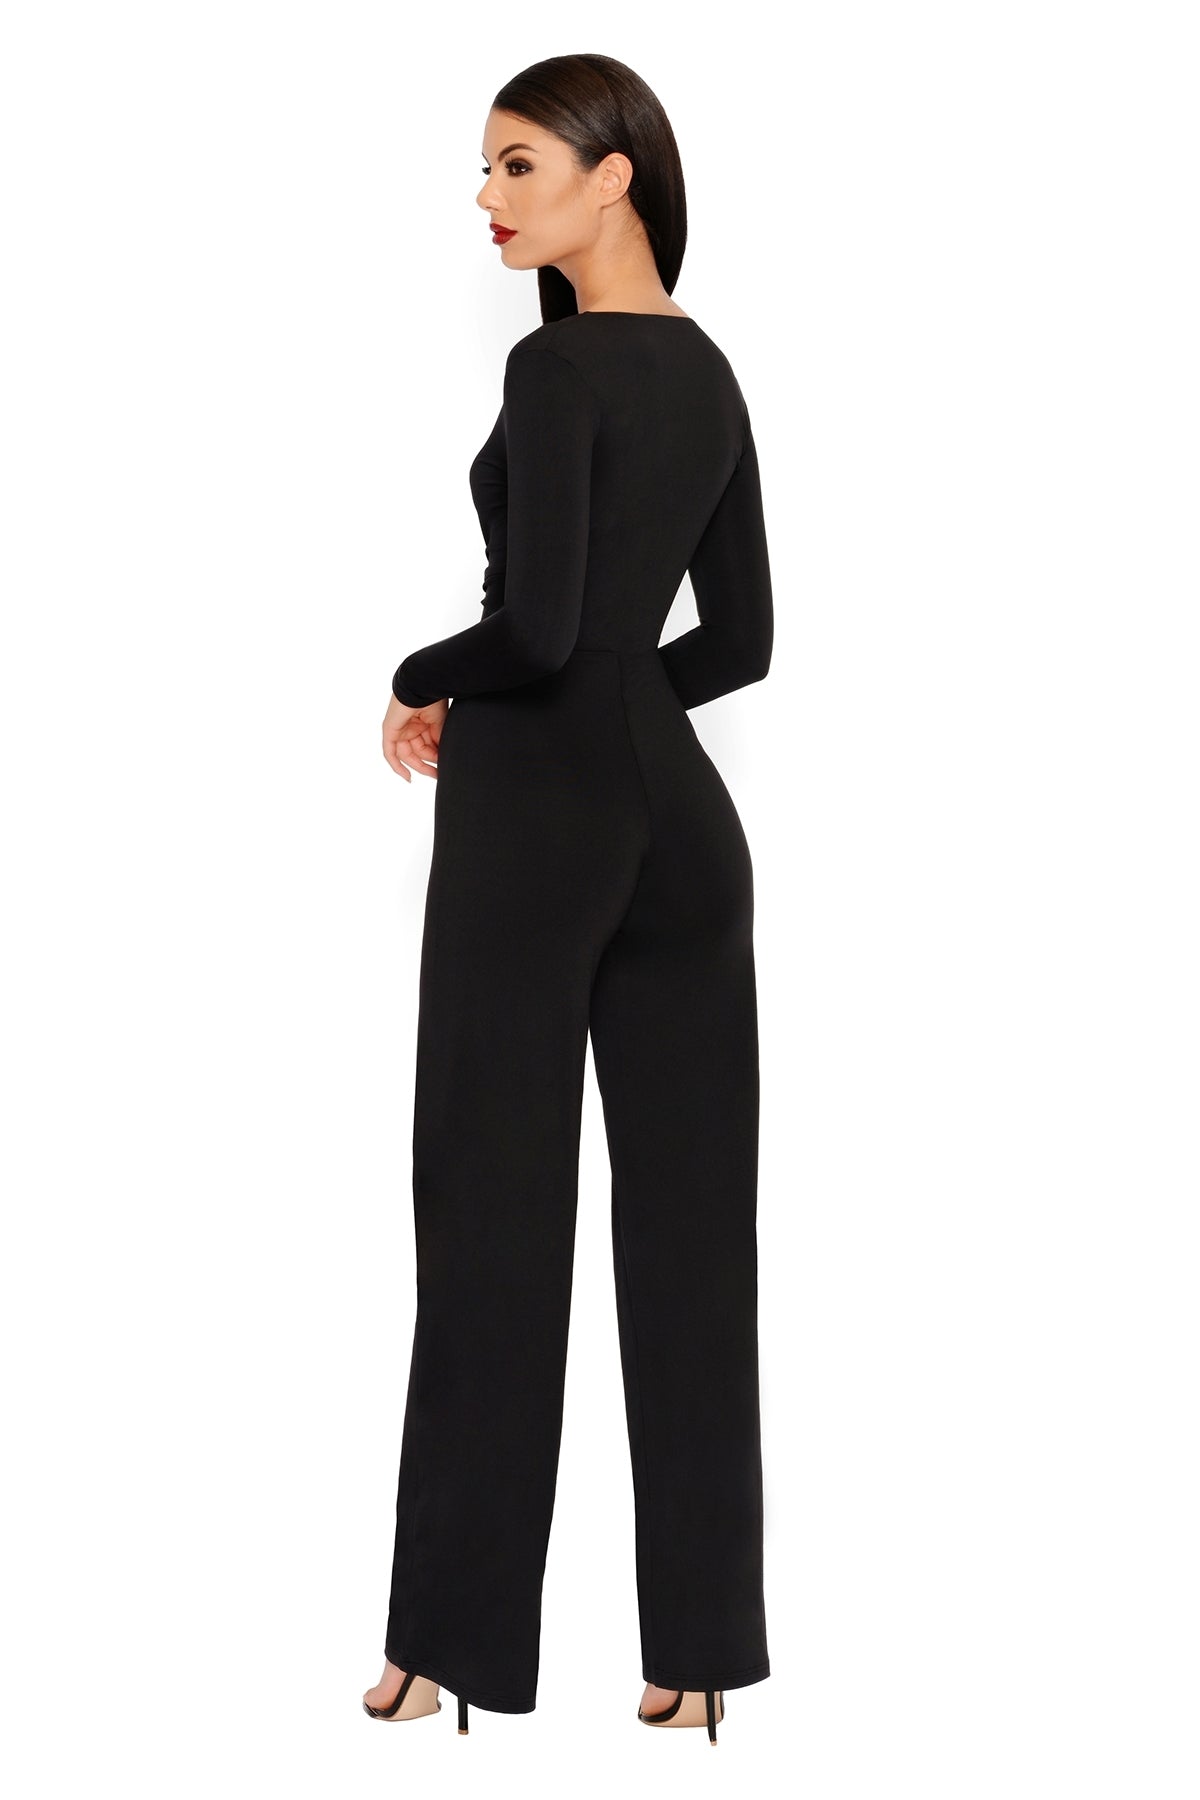 Flow Your Own Way Plunging Wide Leg Jumpsuit in Black